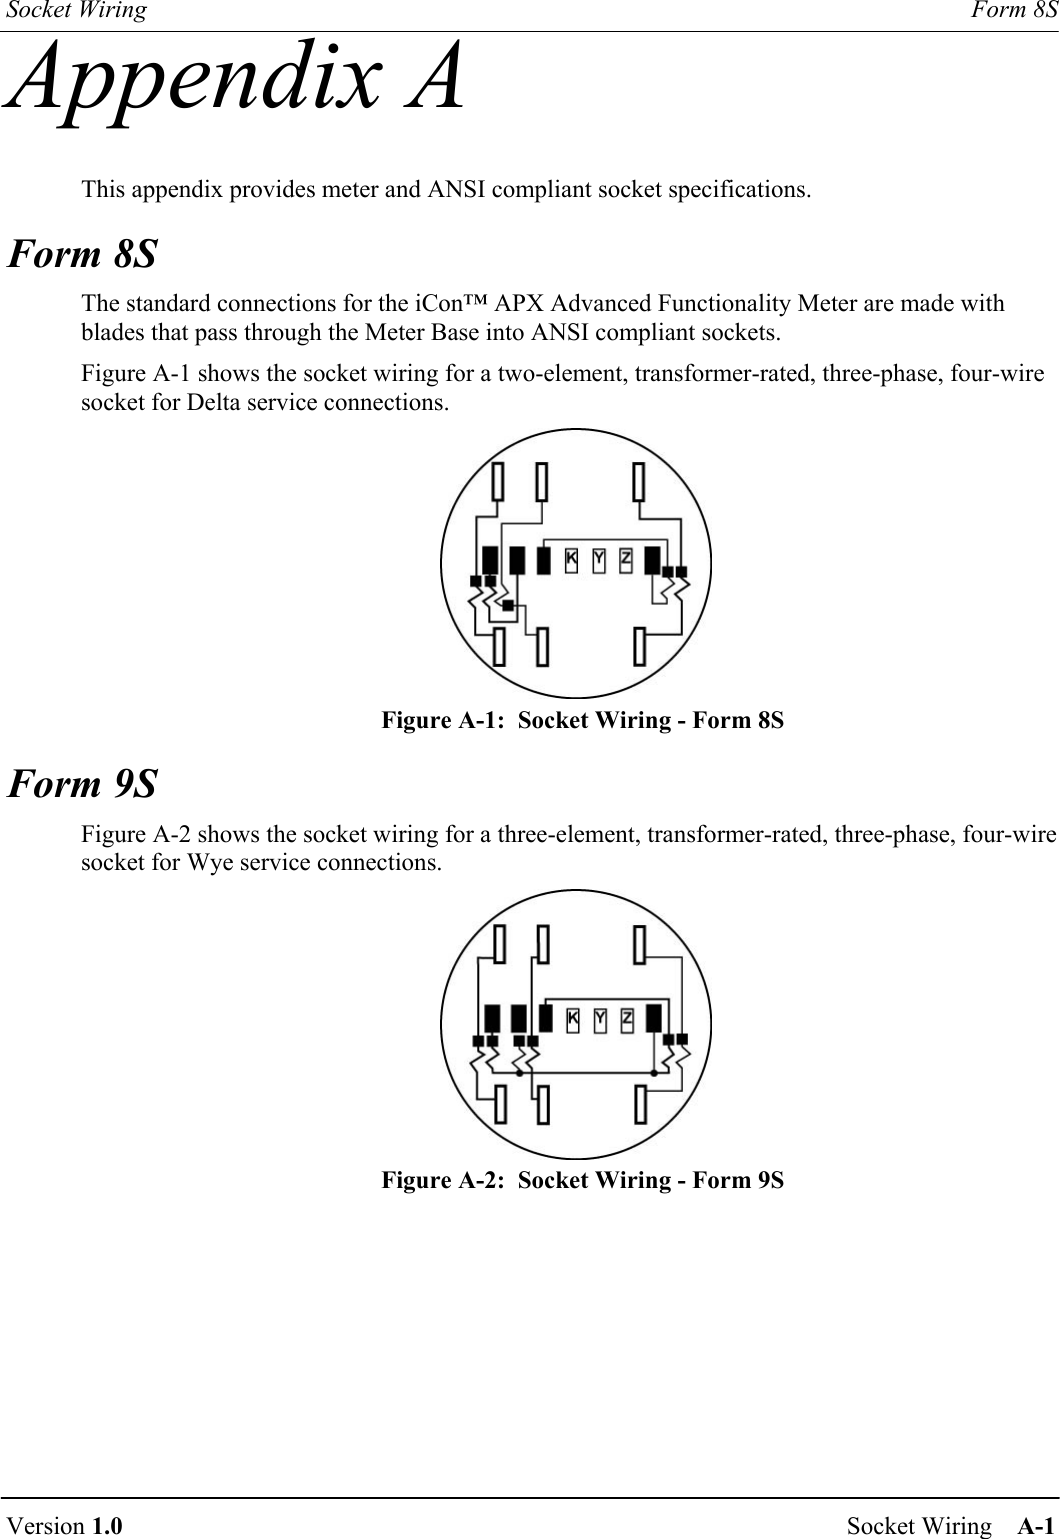 Socket Wiring  Form 8S  Version 1.0  Socket Wiring    A-1  Appendix A This appendix provides meter and ANSI compliant socket specifications. Form 8S The standard connections for the iCon™ APX Advanced Functionality Meter are made with blades that pass through the Meter Base into ANSI compliant sockets. Figure A-1 shows the socket wiring for a two-element, transformer-rated, three-phase, four-wire socket for Delta service connections.  Figure A-1:  Socket Wiring - Form 8S Form 9S Figure A-2 shows the socket wiring for a three-element, transformer-rated, three-phase, four-wire socket for Wye service connections.  Figure A-2:  Socket Wiring - Form 9S 